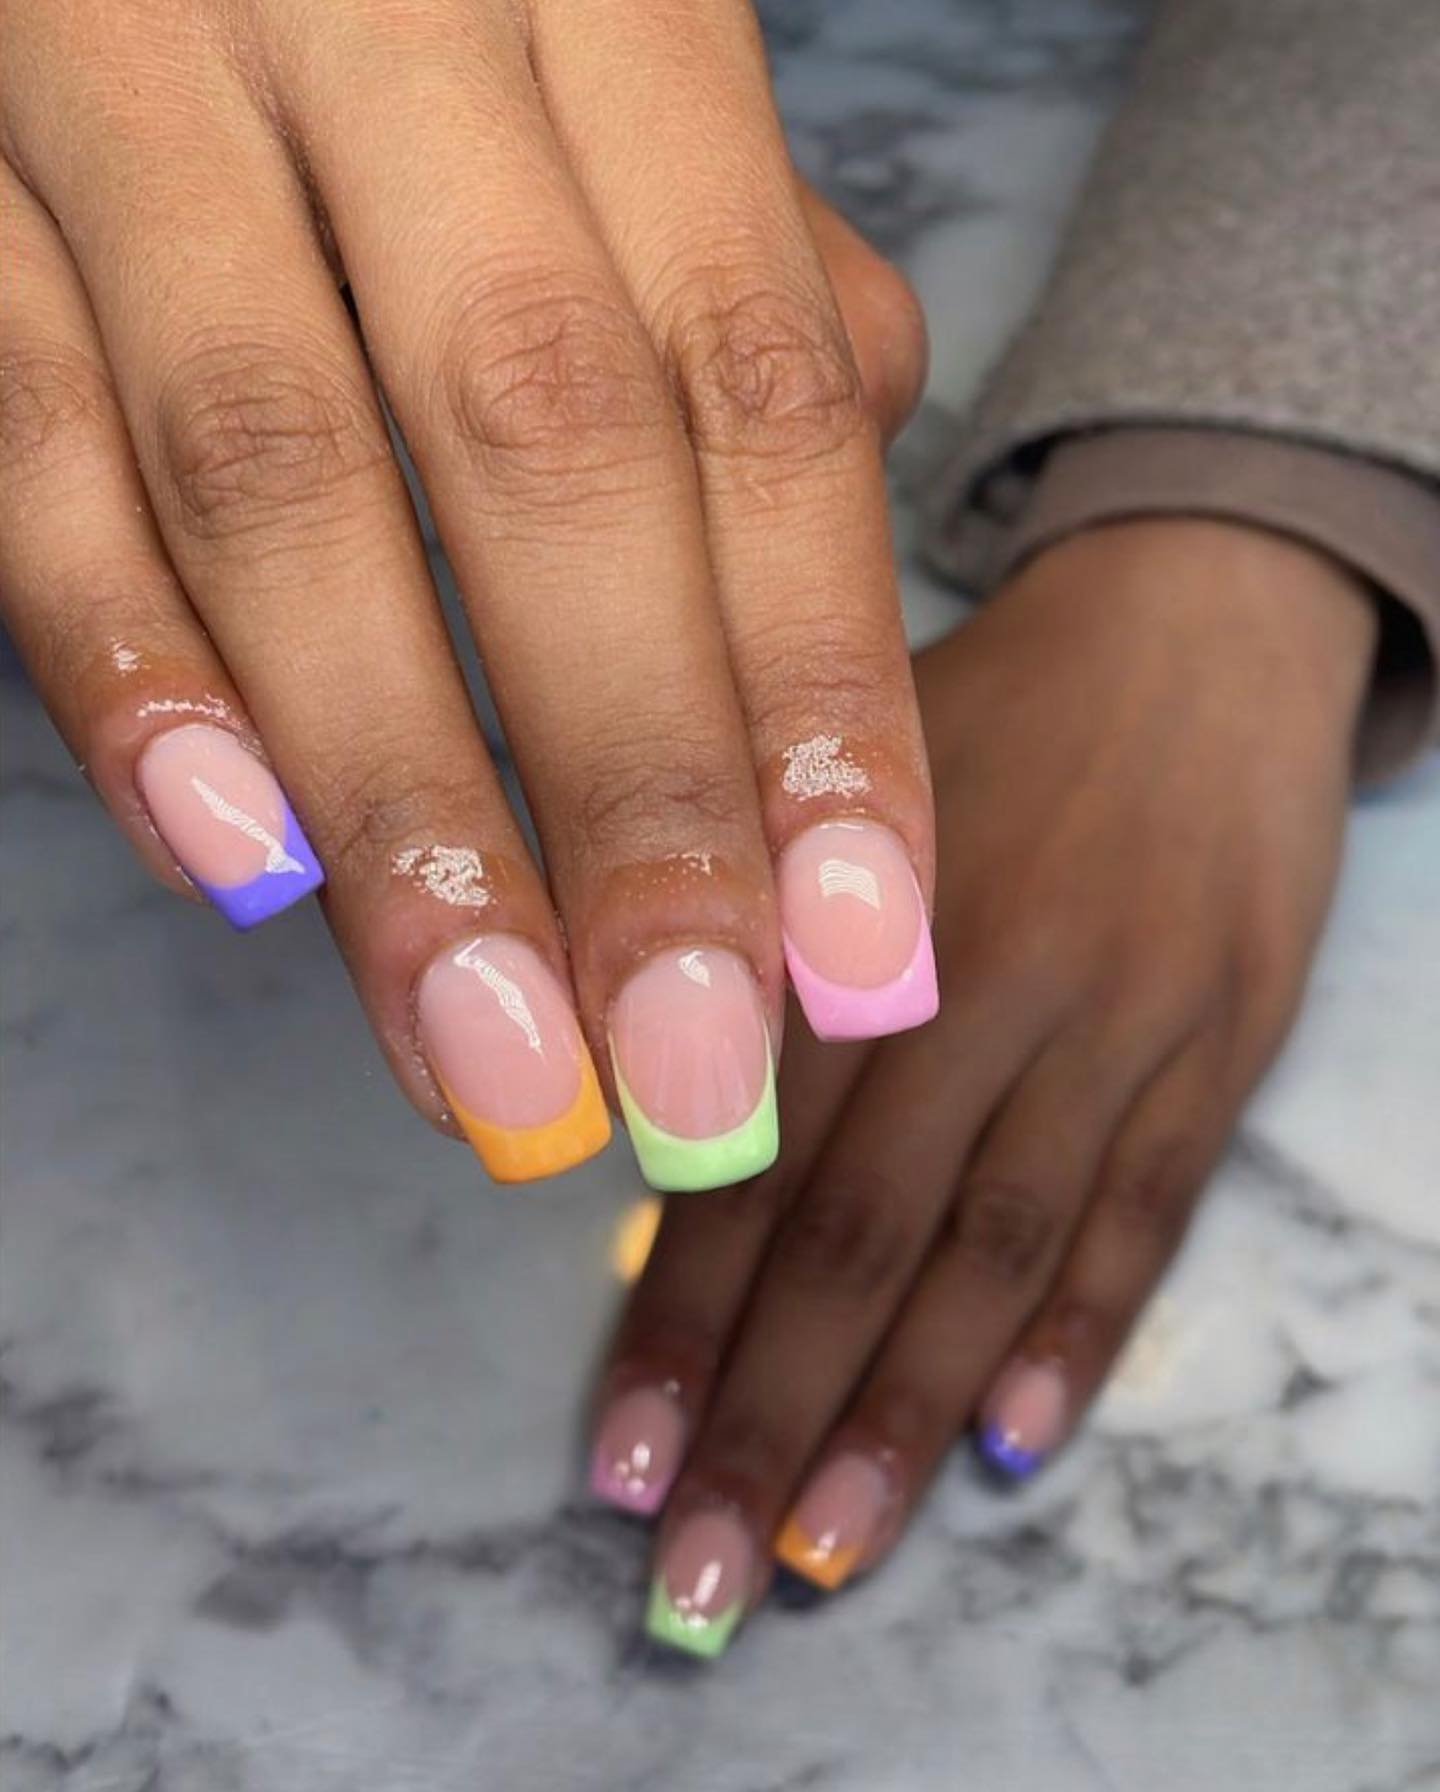 10 Double French Manicure Designs For Summer Nail Art Inspiration